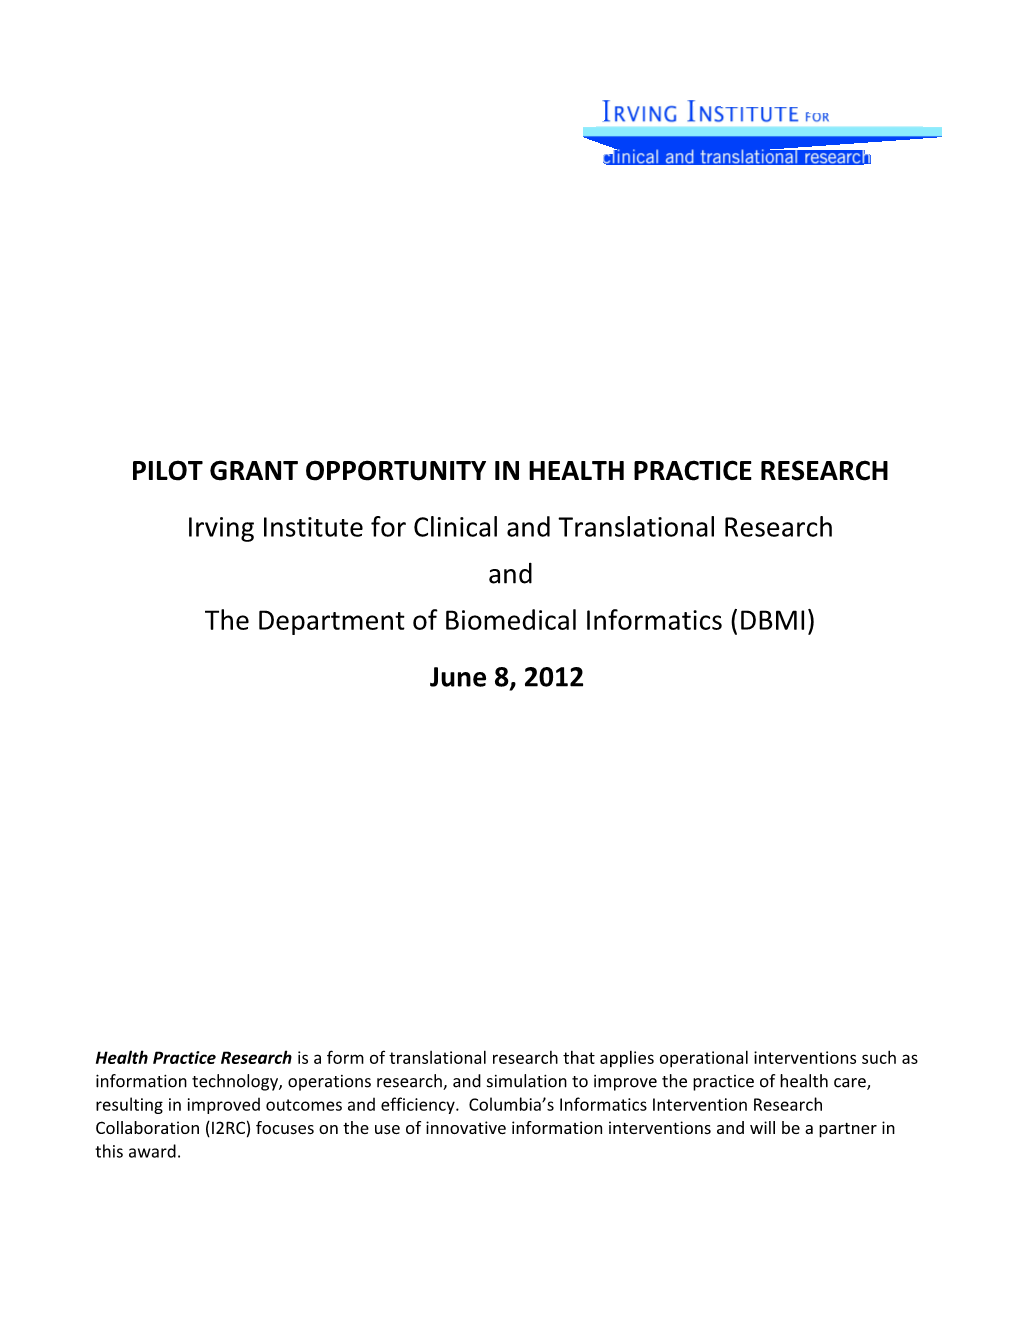 Pilot Grant Opportunity in Health Practice Research